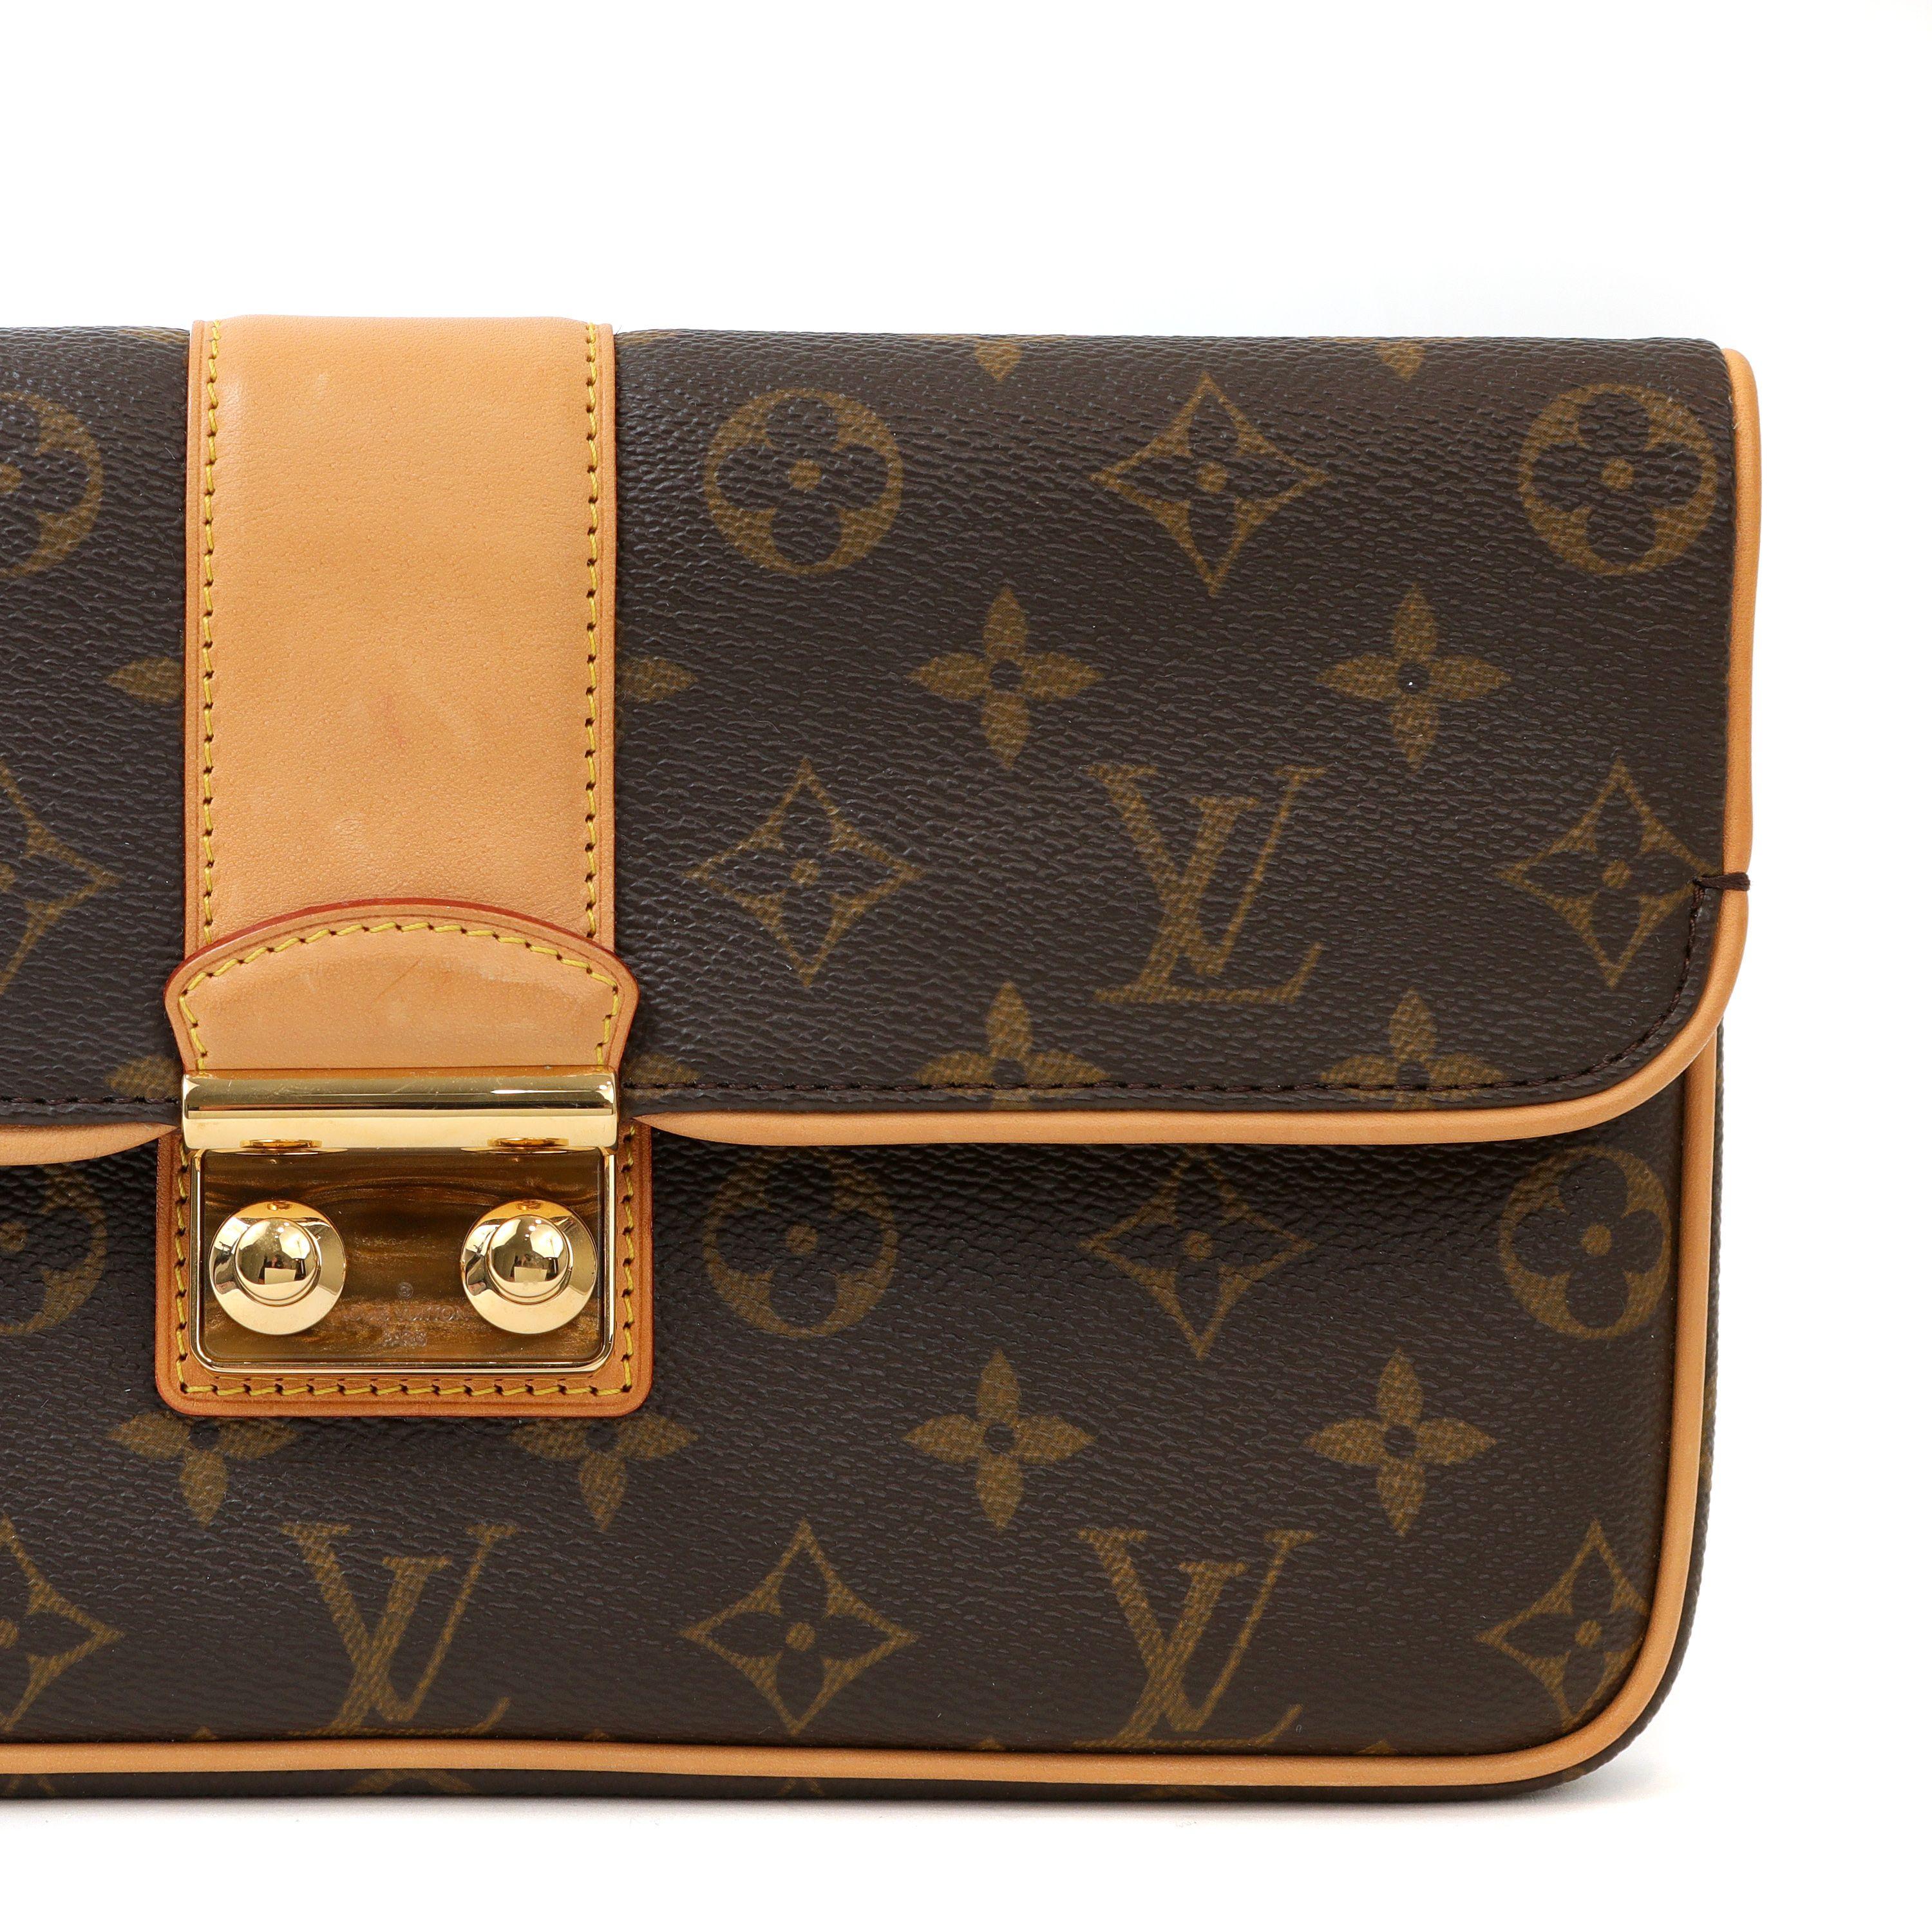 This authentic Louis Vuitton x Sofia Coppola Monogram Clutch is in excellent condition.  Signature Louis Vuitton brown and tan monogram coated canvas with vachetta leather trim.  Gold tone and resin details. 

PBF 13924
